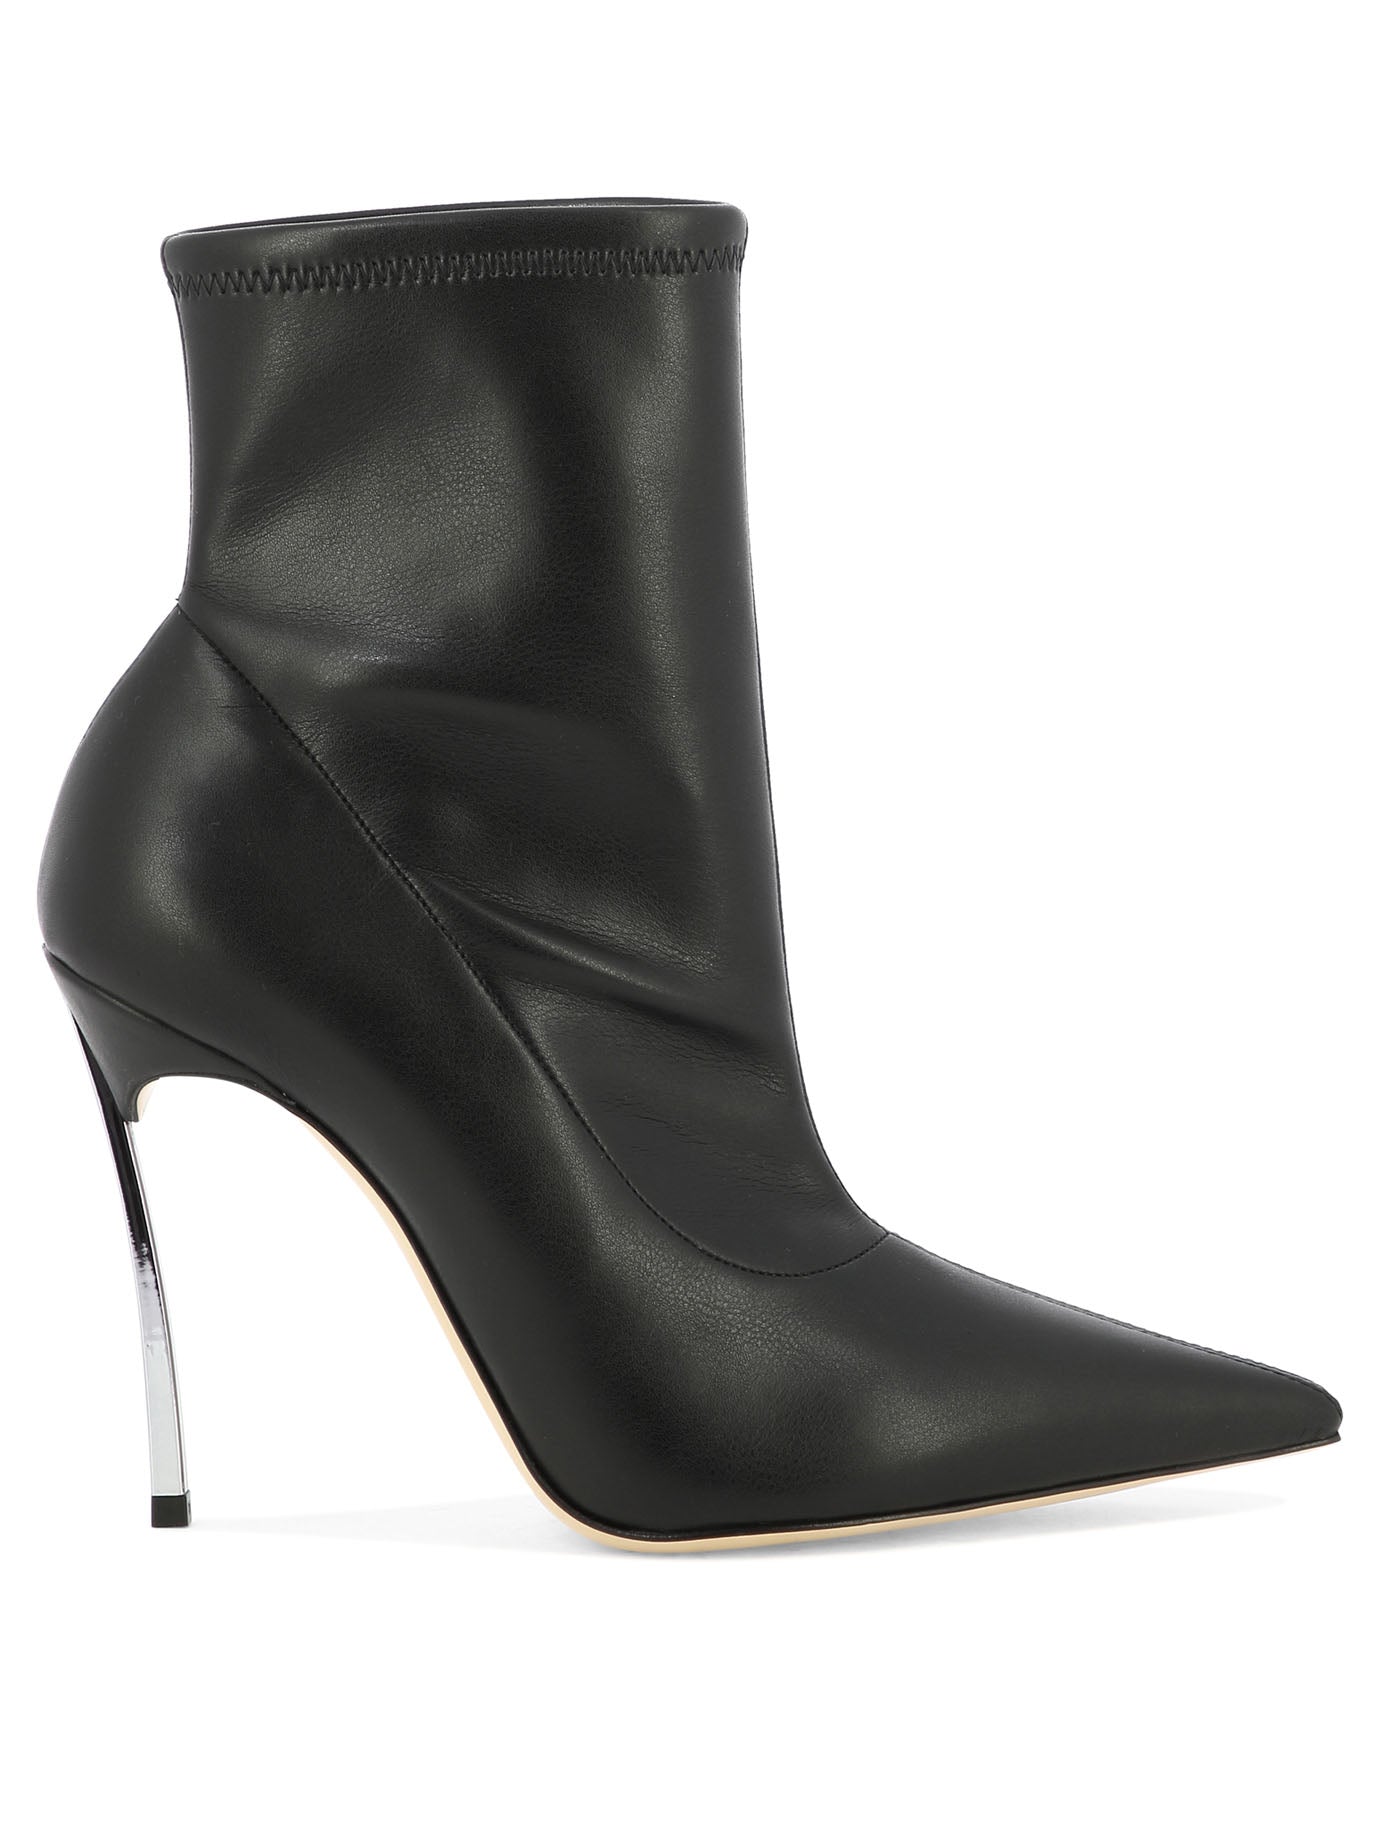 Shop Casadei Elegant Black Ankle Boots For Women, High Quality Leather Sole And Pointed Toe